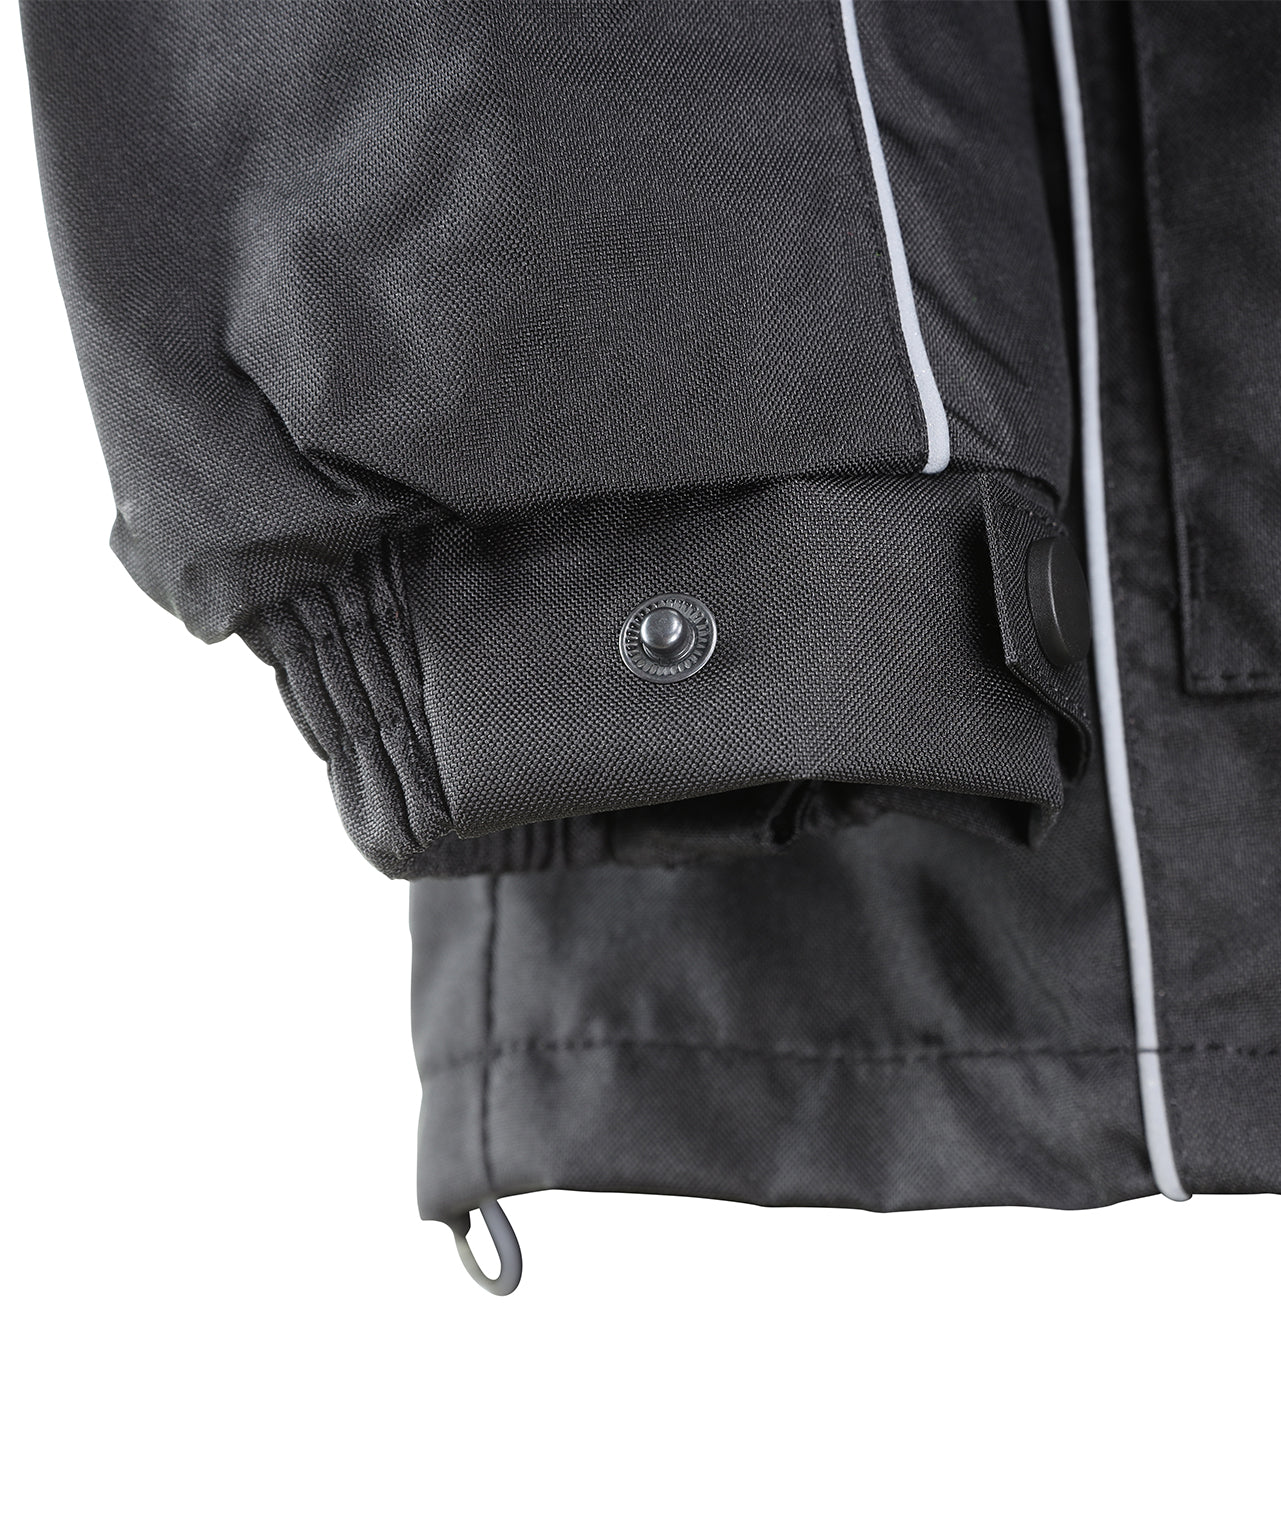 431STBK Reflective Jacket: Parka: Breathable Waterproof Hooded